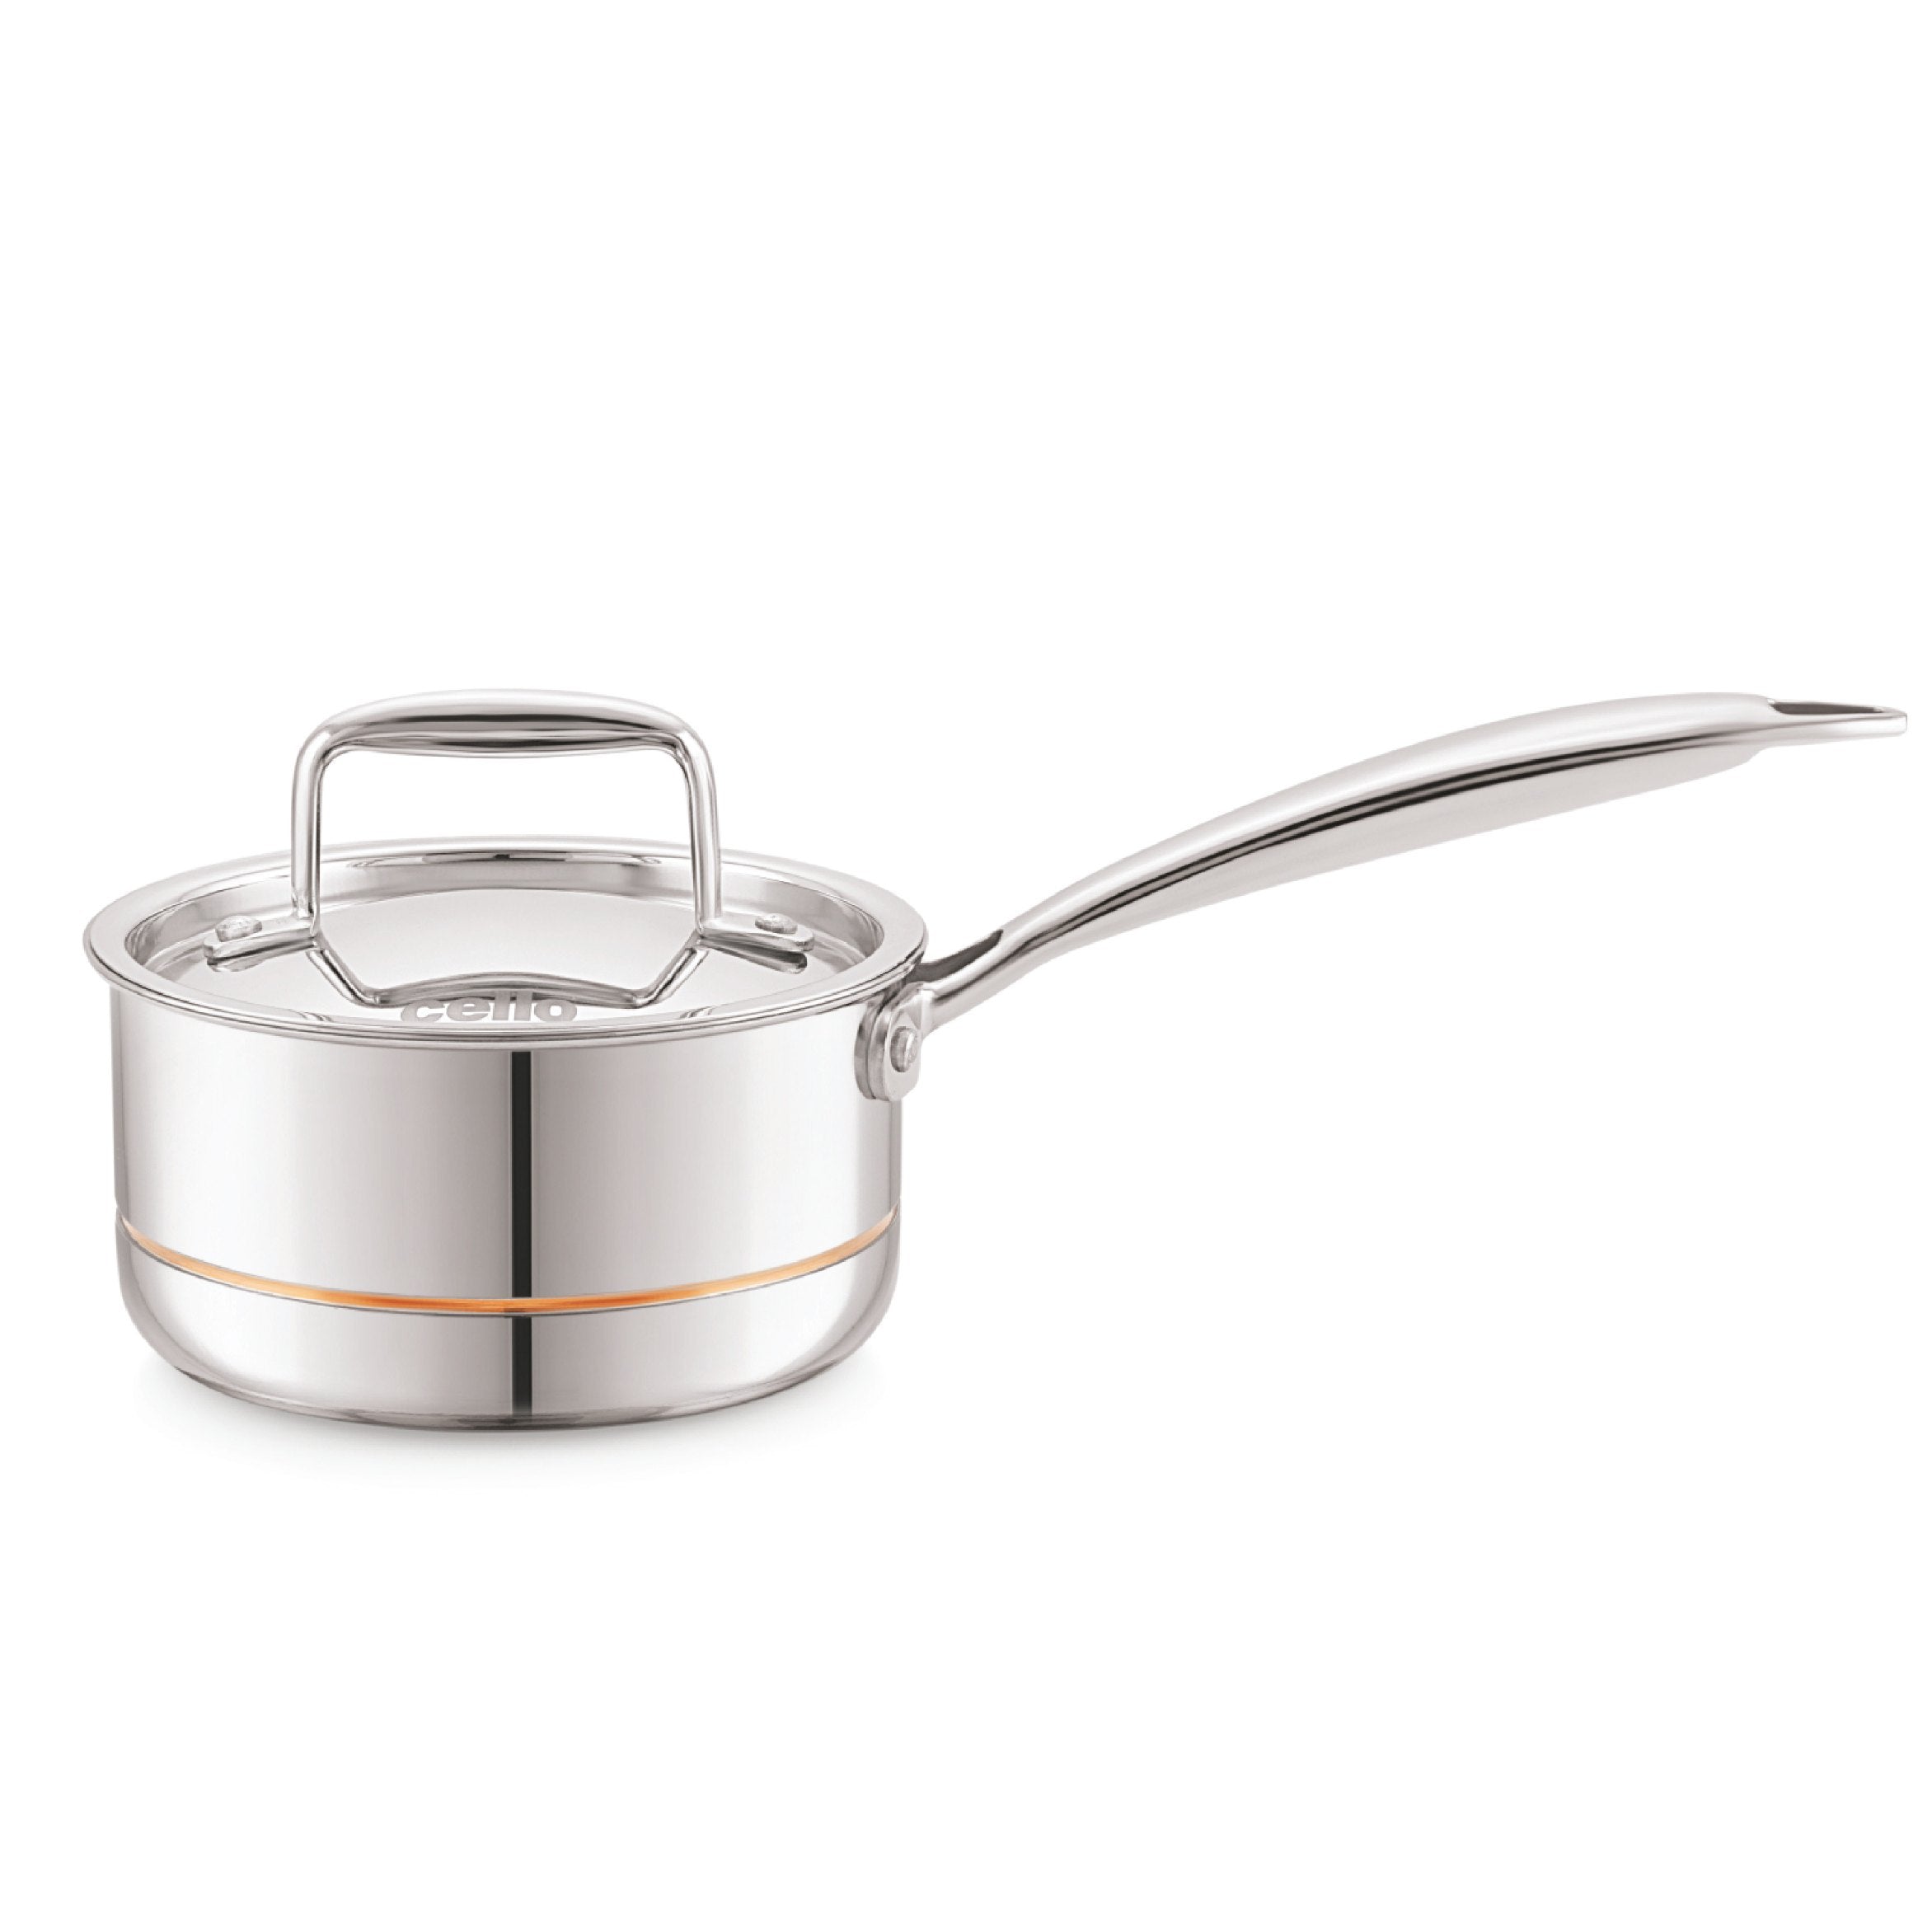 5-Ply Stainless Steel Sauce Pan with Lid Silver / 1 Litre